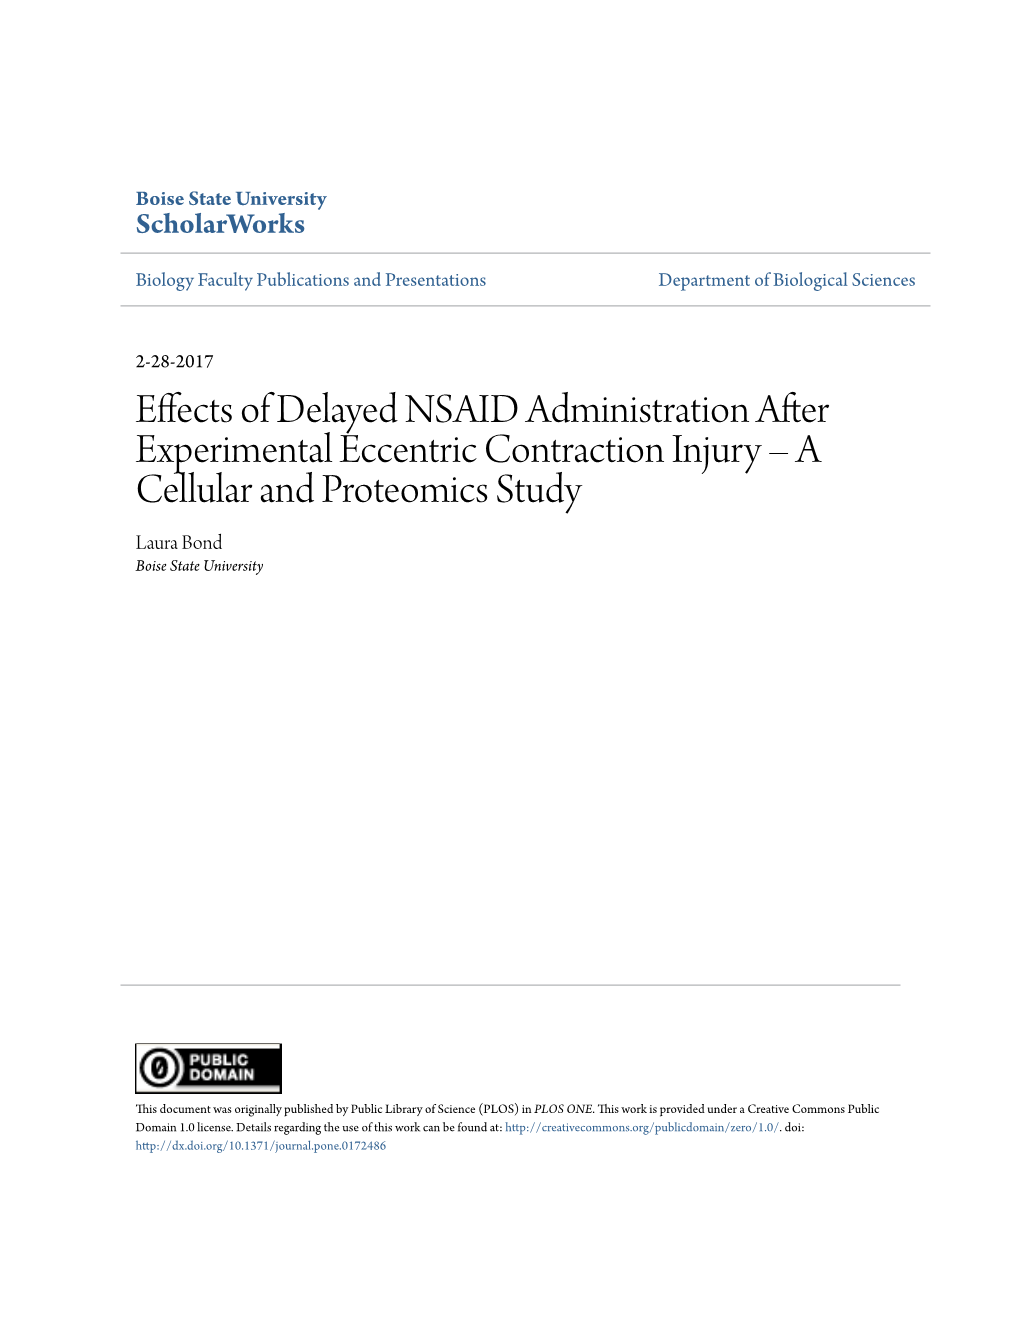 Effects of Delayed NSAID Administration After Experimental Eccentric Contraction Injury – a Cellular and Proteomics Study Laura Bond Boise State University